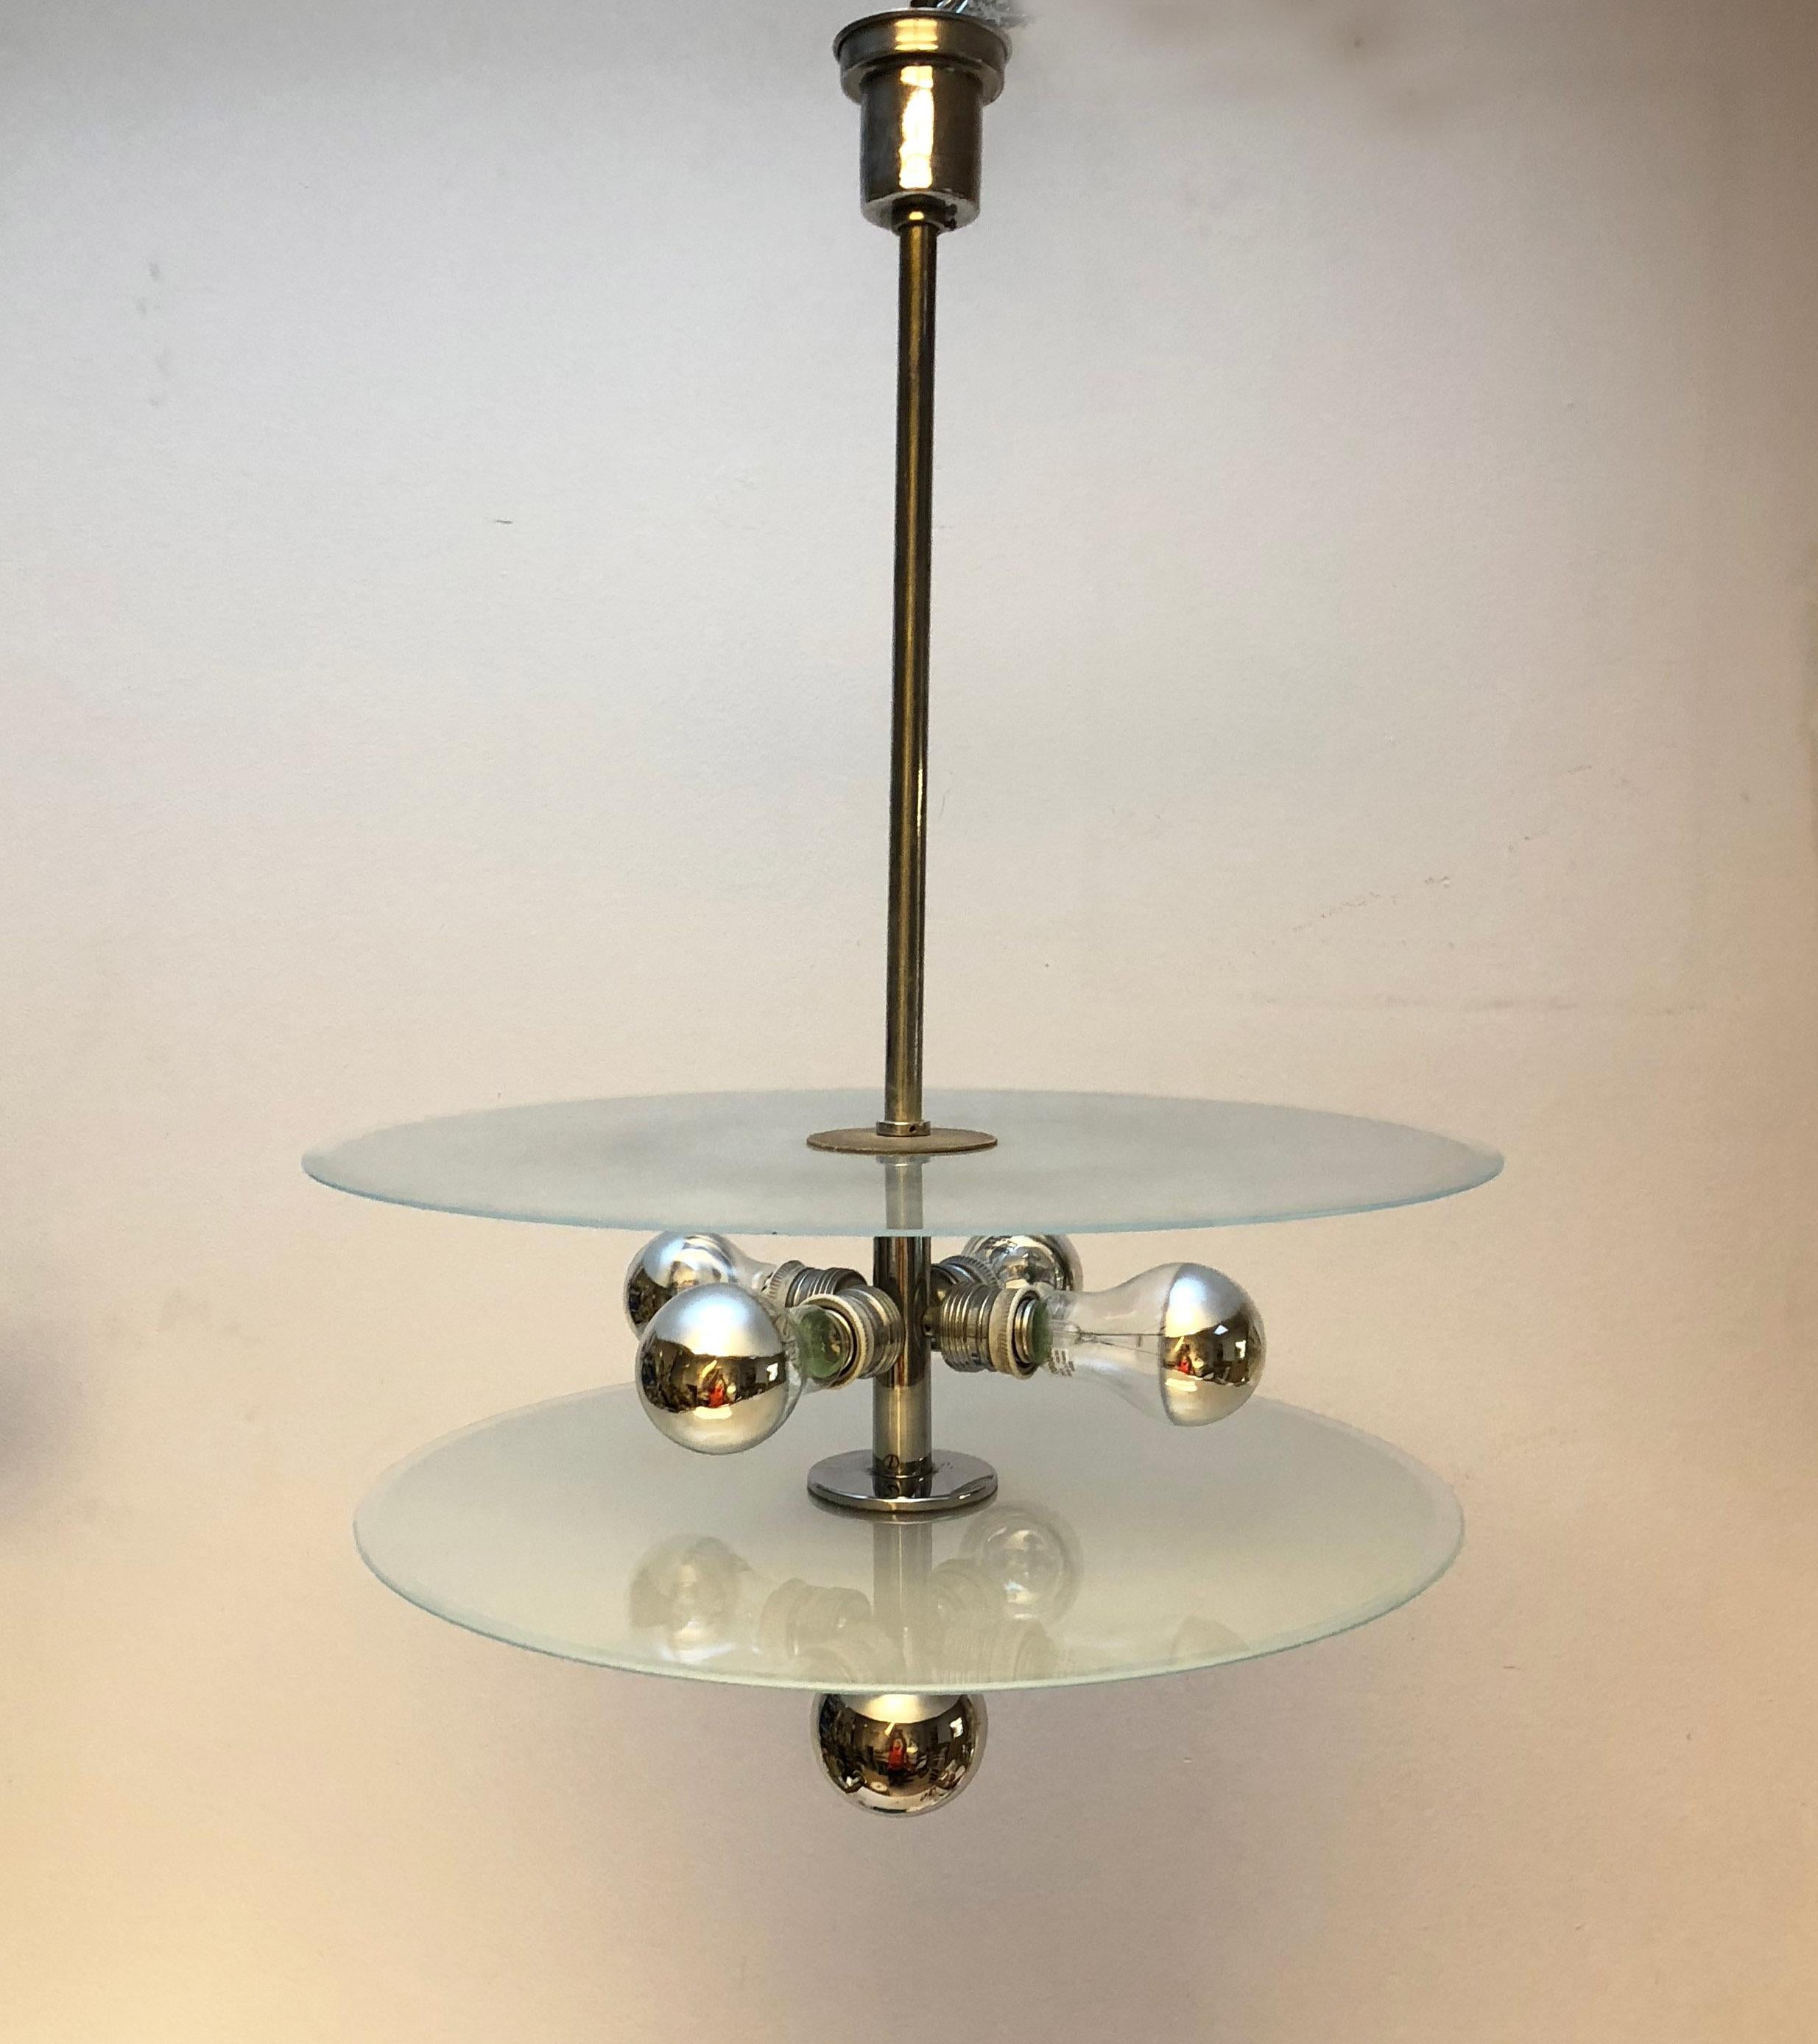 Bauhaus Chandelier by Schwintzer & Graeff from the 1930s For Sale 7